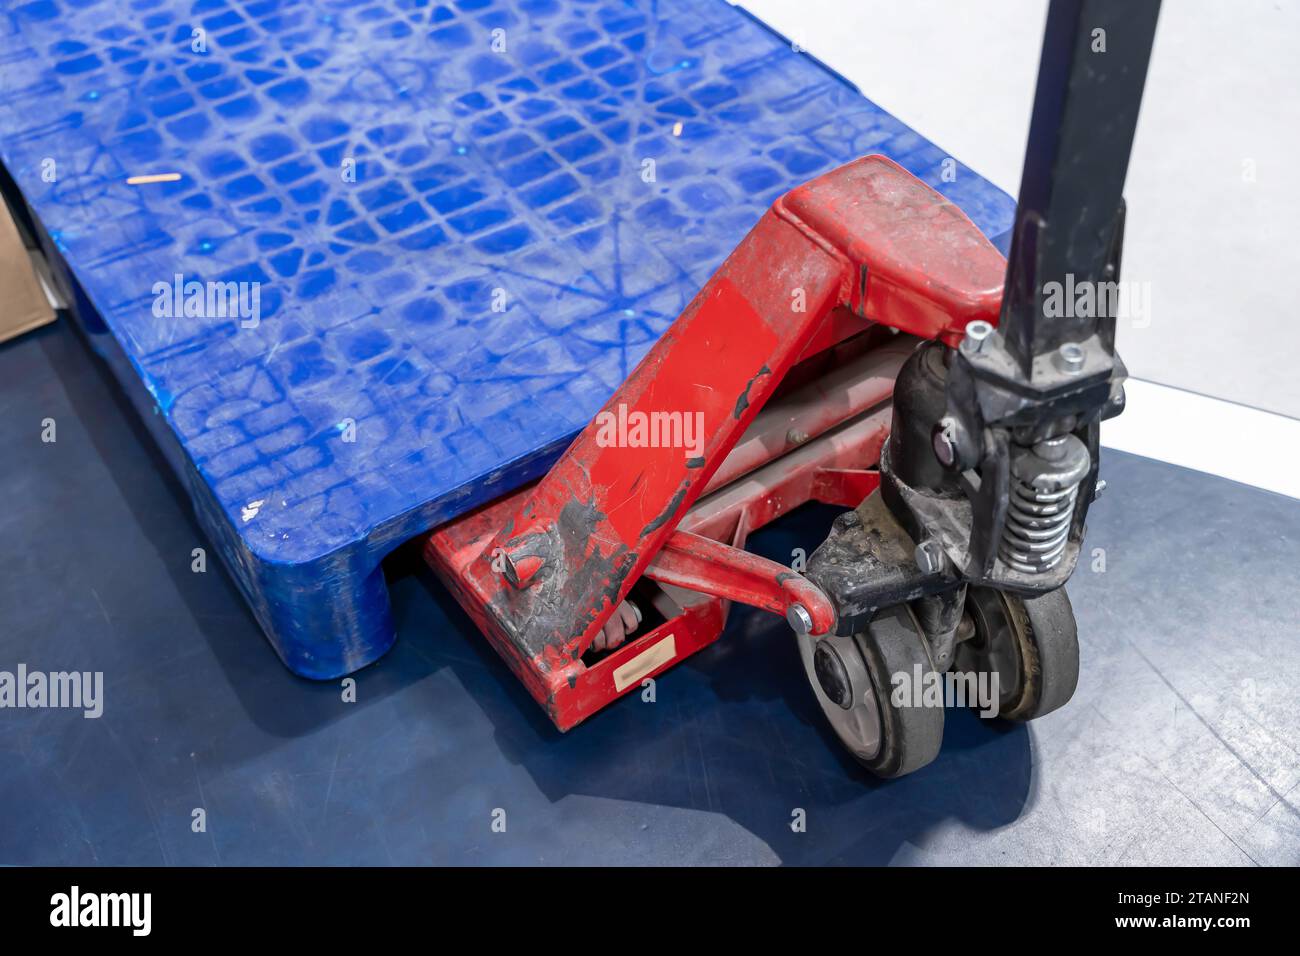 A manual hydraulic pallet lift stands on the warehouse floor, ready to transport heavy pallets of goods in a bustling store. The industrial setting co Stock Photo